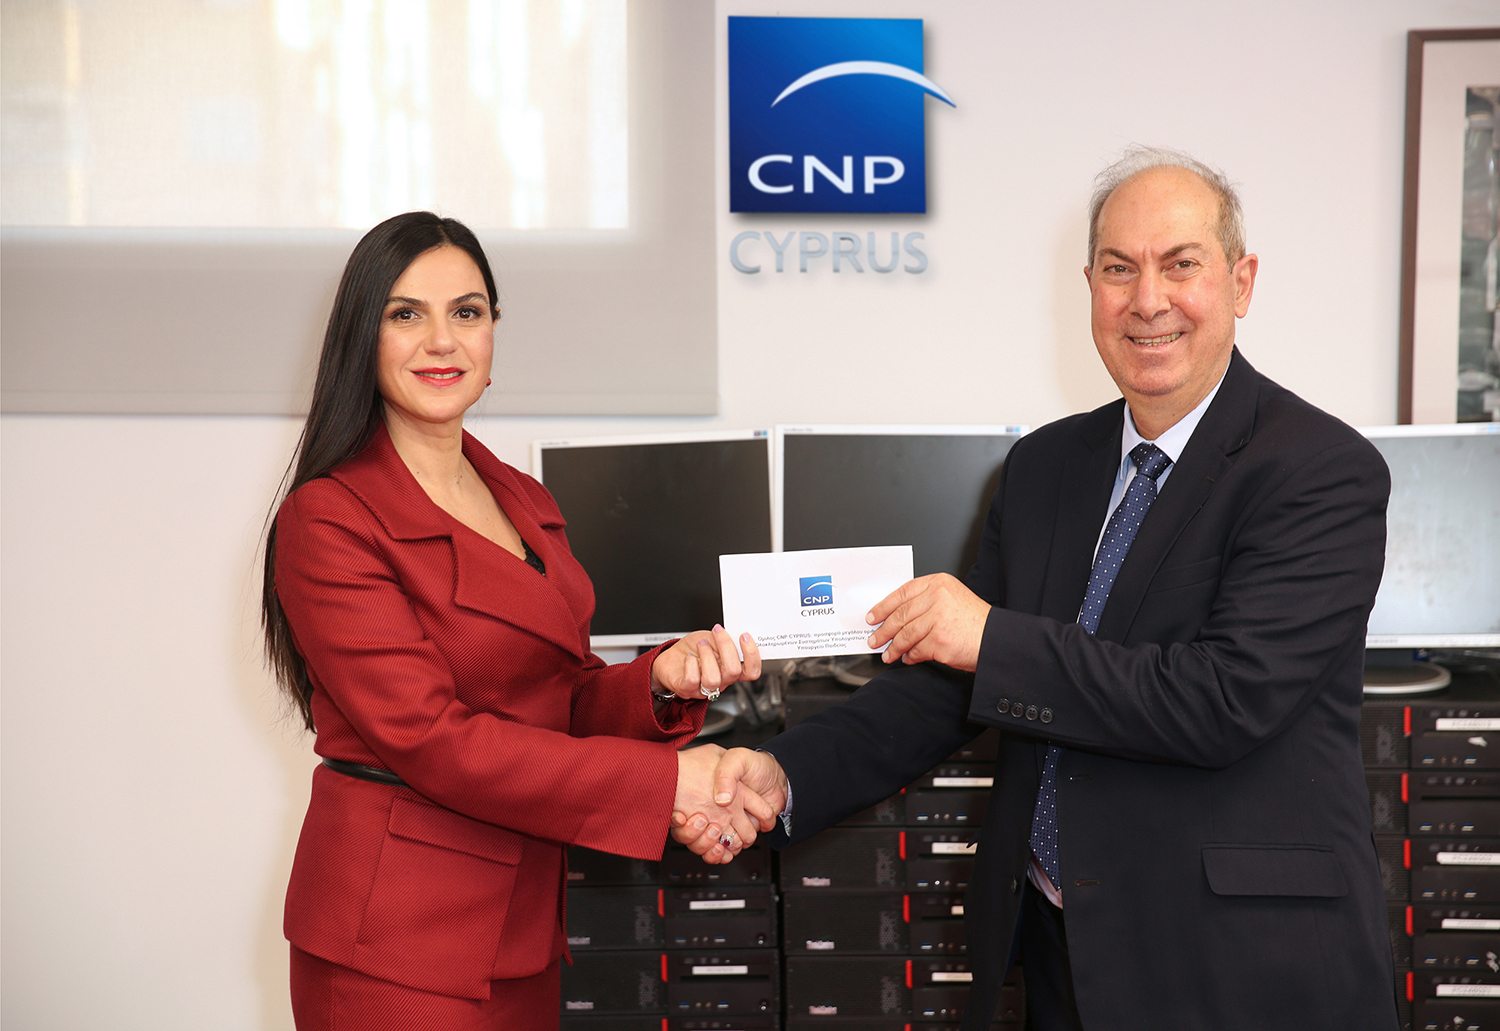 CNP CYPRUS Group: offer of a large number of Complete Computer Systems, to the Ministry of Education